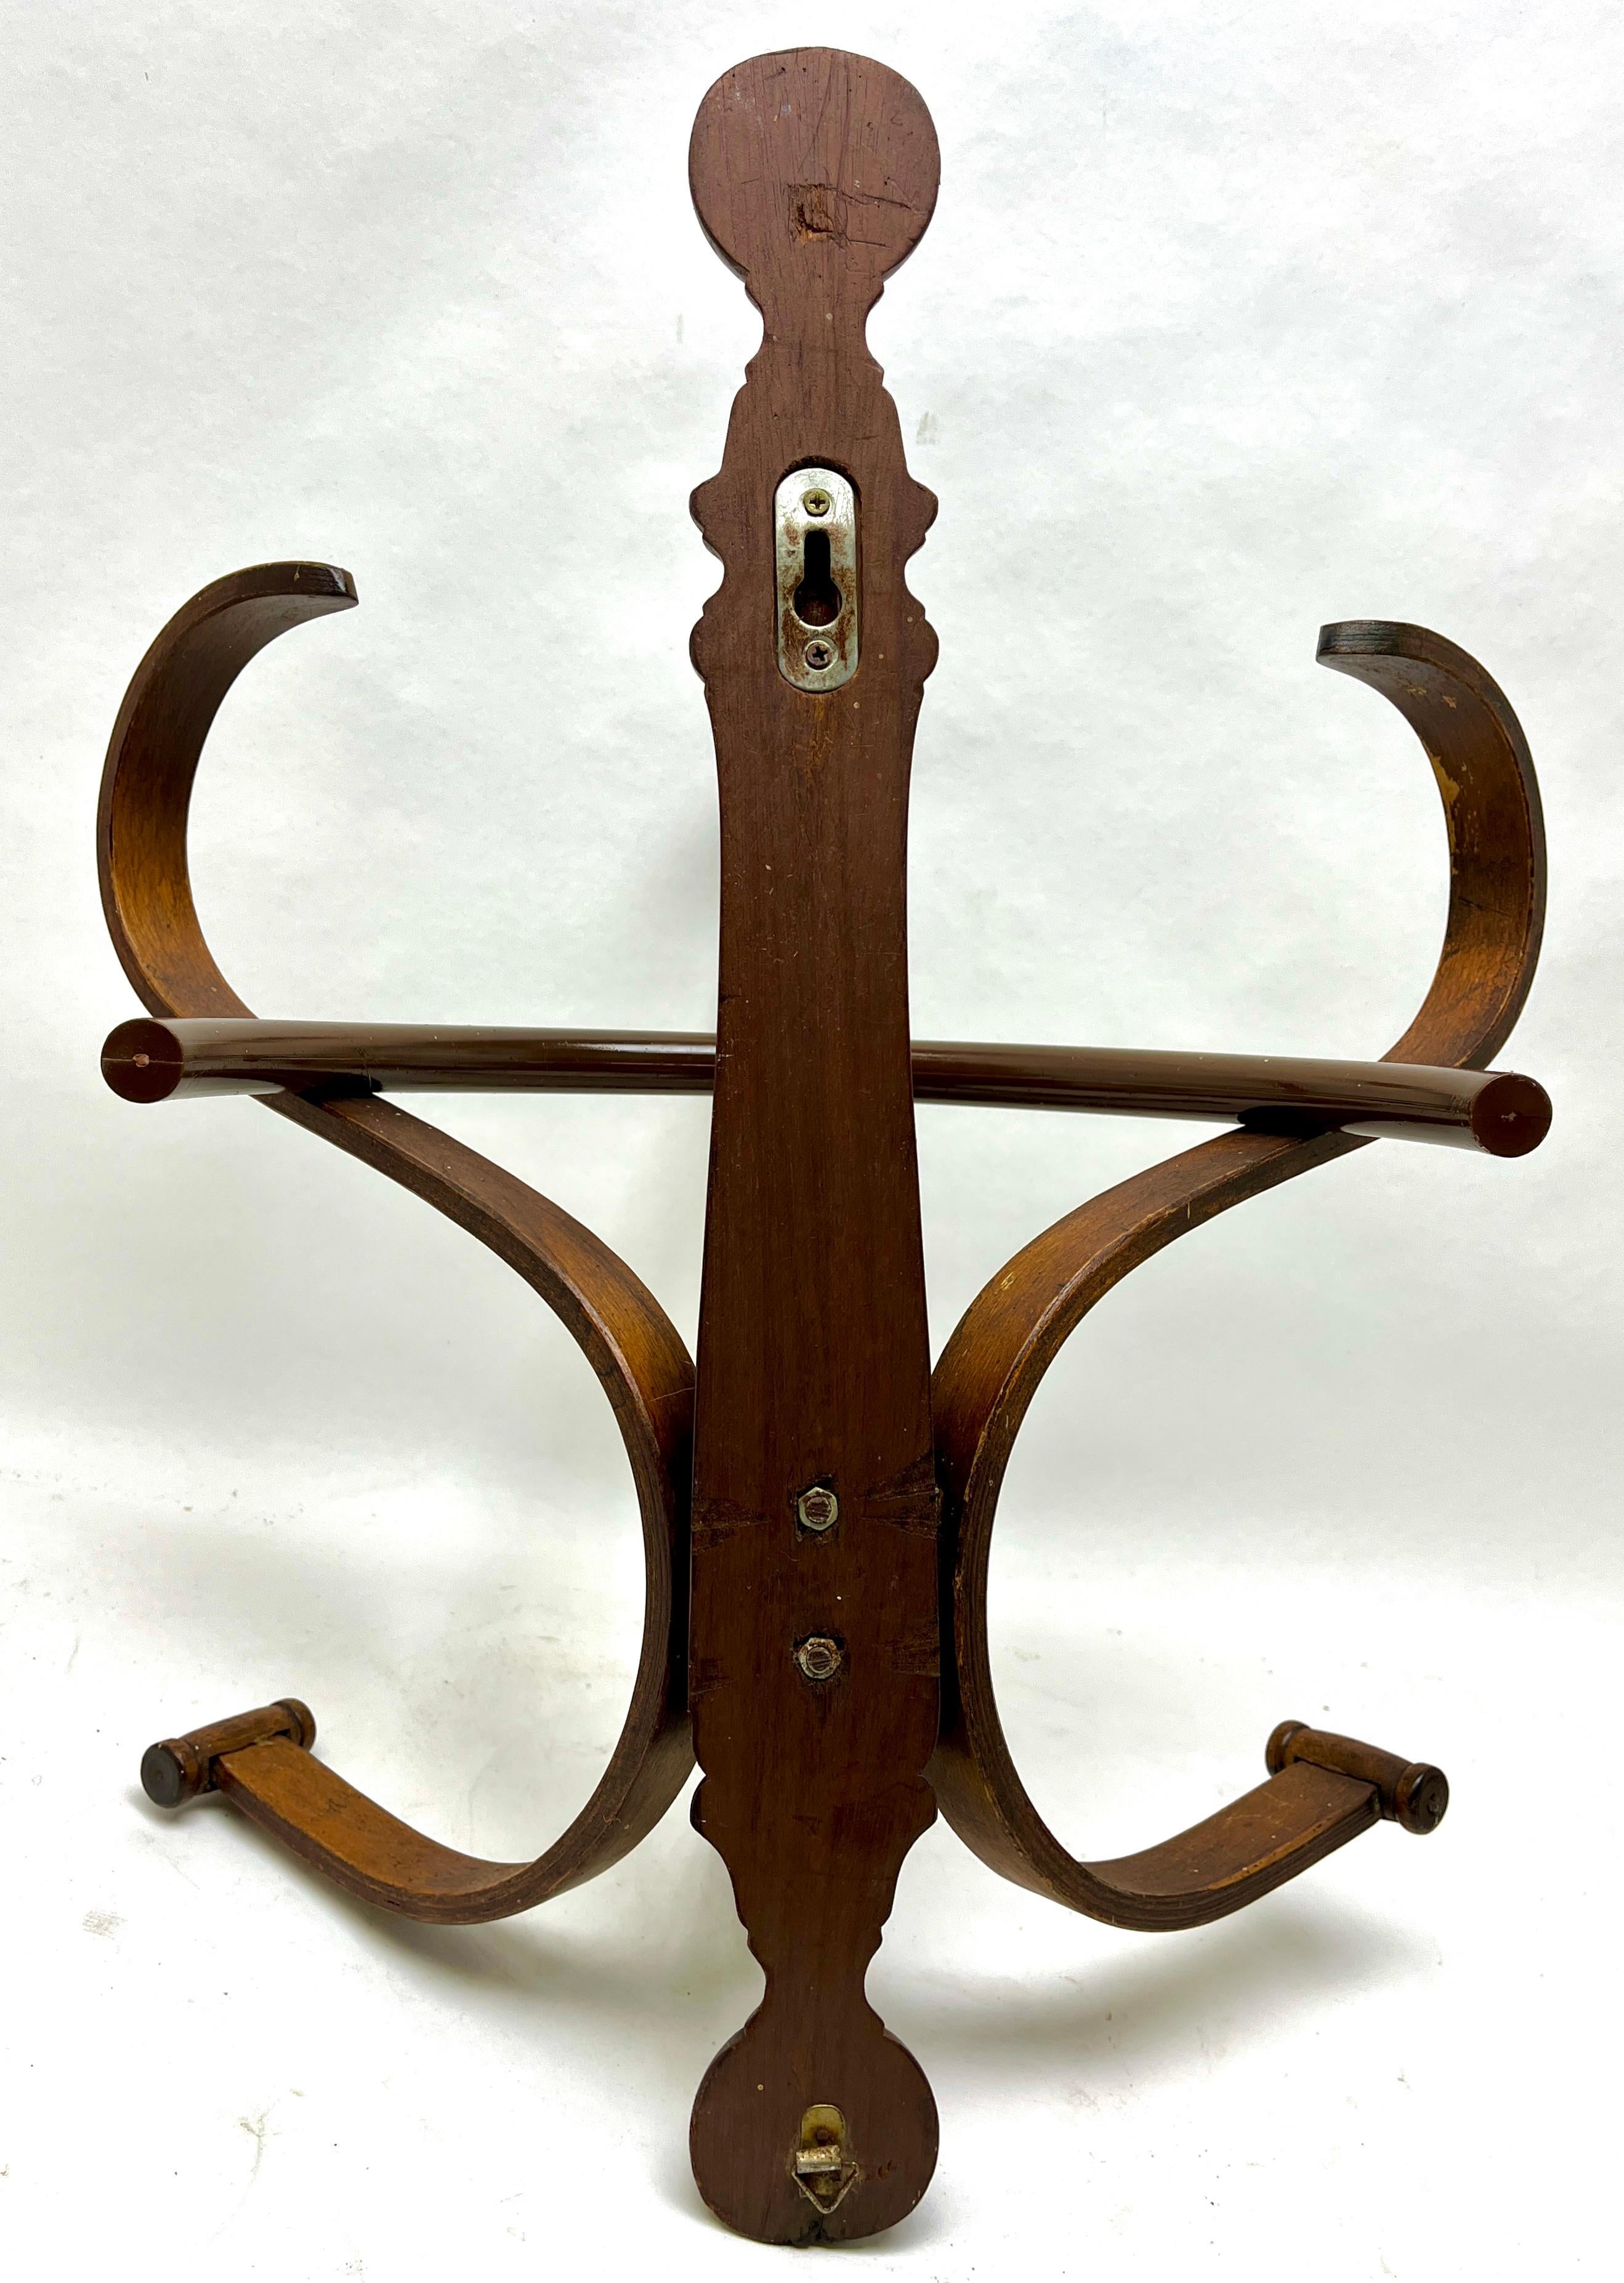 Austrian Art Nouveau Bentwood Wall Coat Rack Attributed to Thonet, Vienna, 1910s